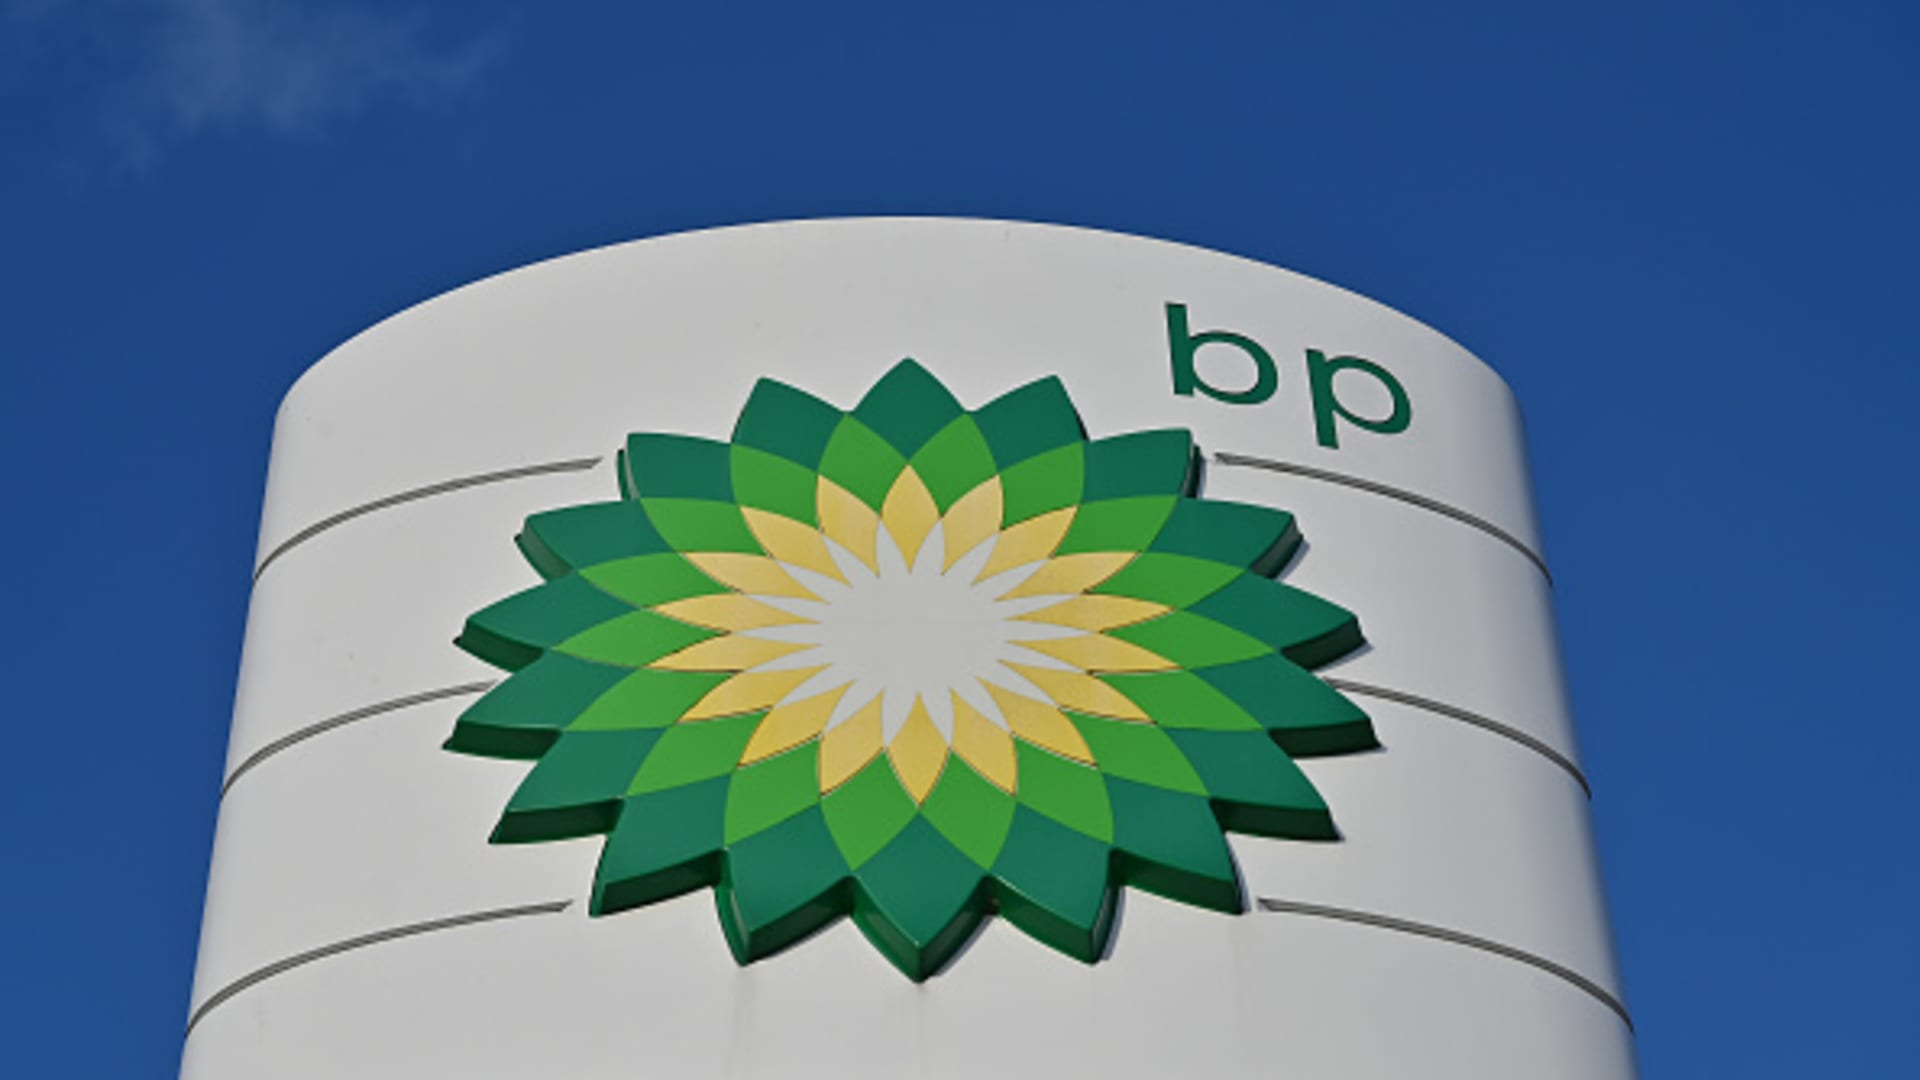 A general view of the BP logo and petrol station forecourt sign on January 22, 2024 in Southend, United Kingdom.